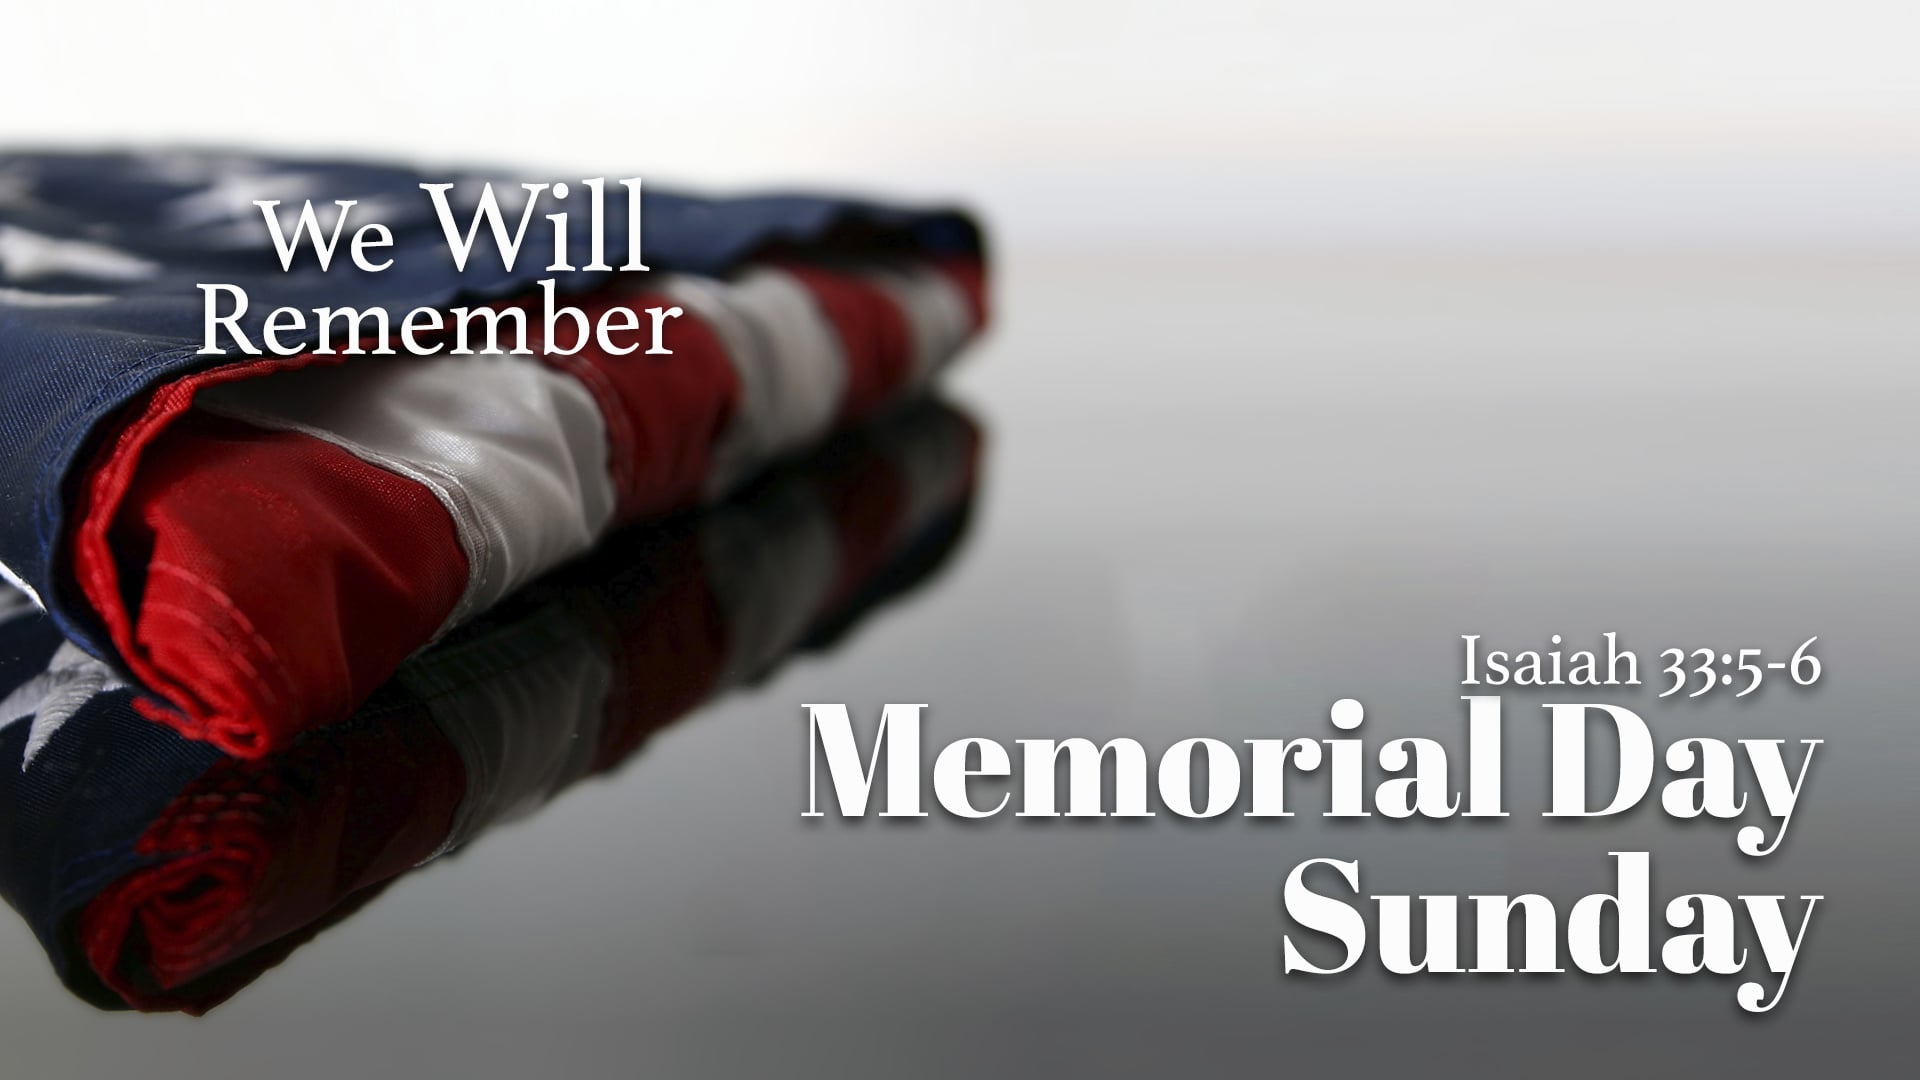 "Memorial Day" - Text to Give - 910-460-3377 - Give Online @ www.destinynow.org